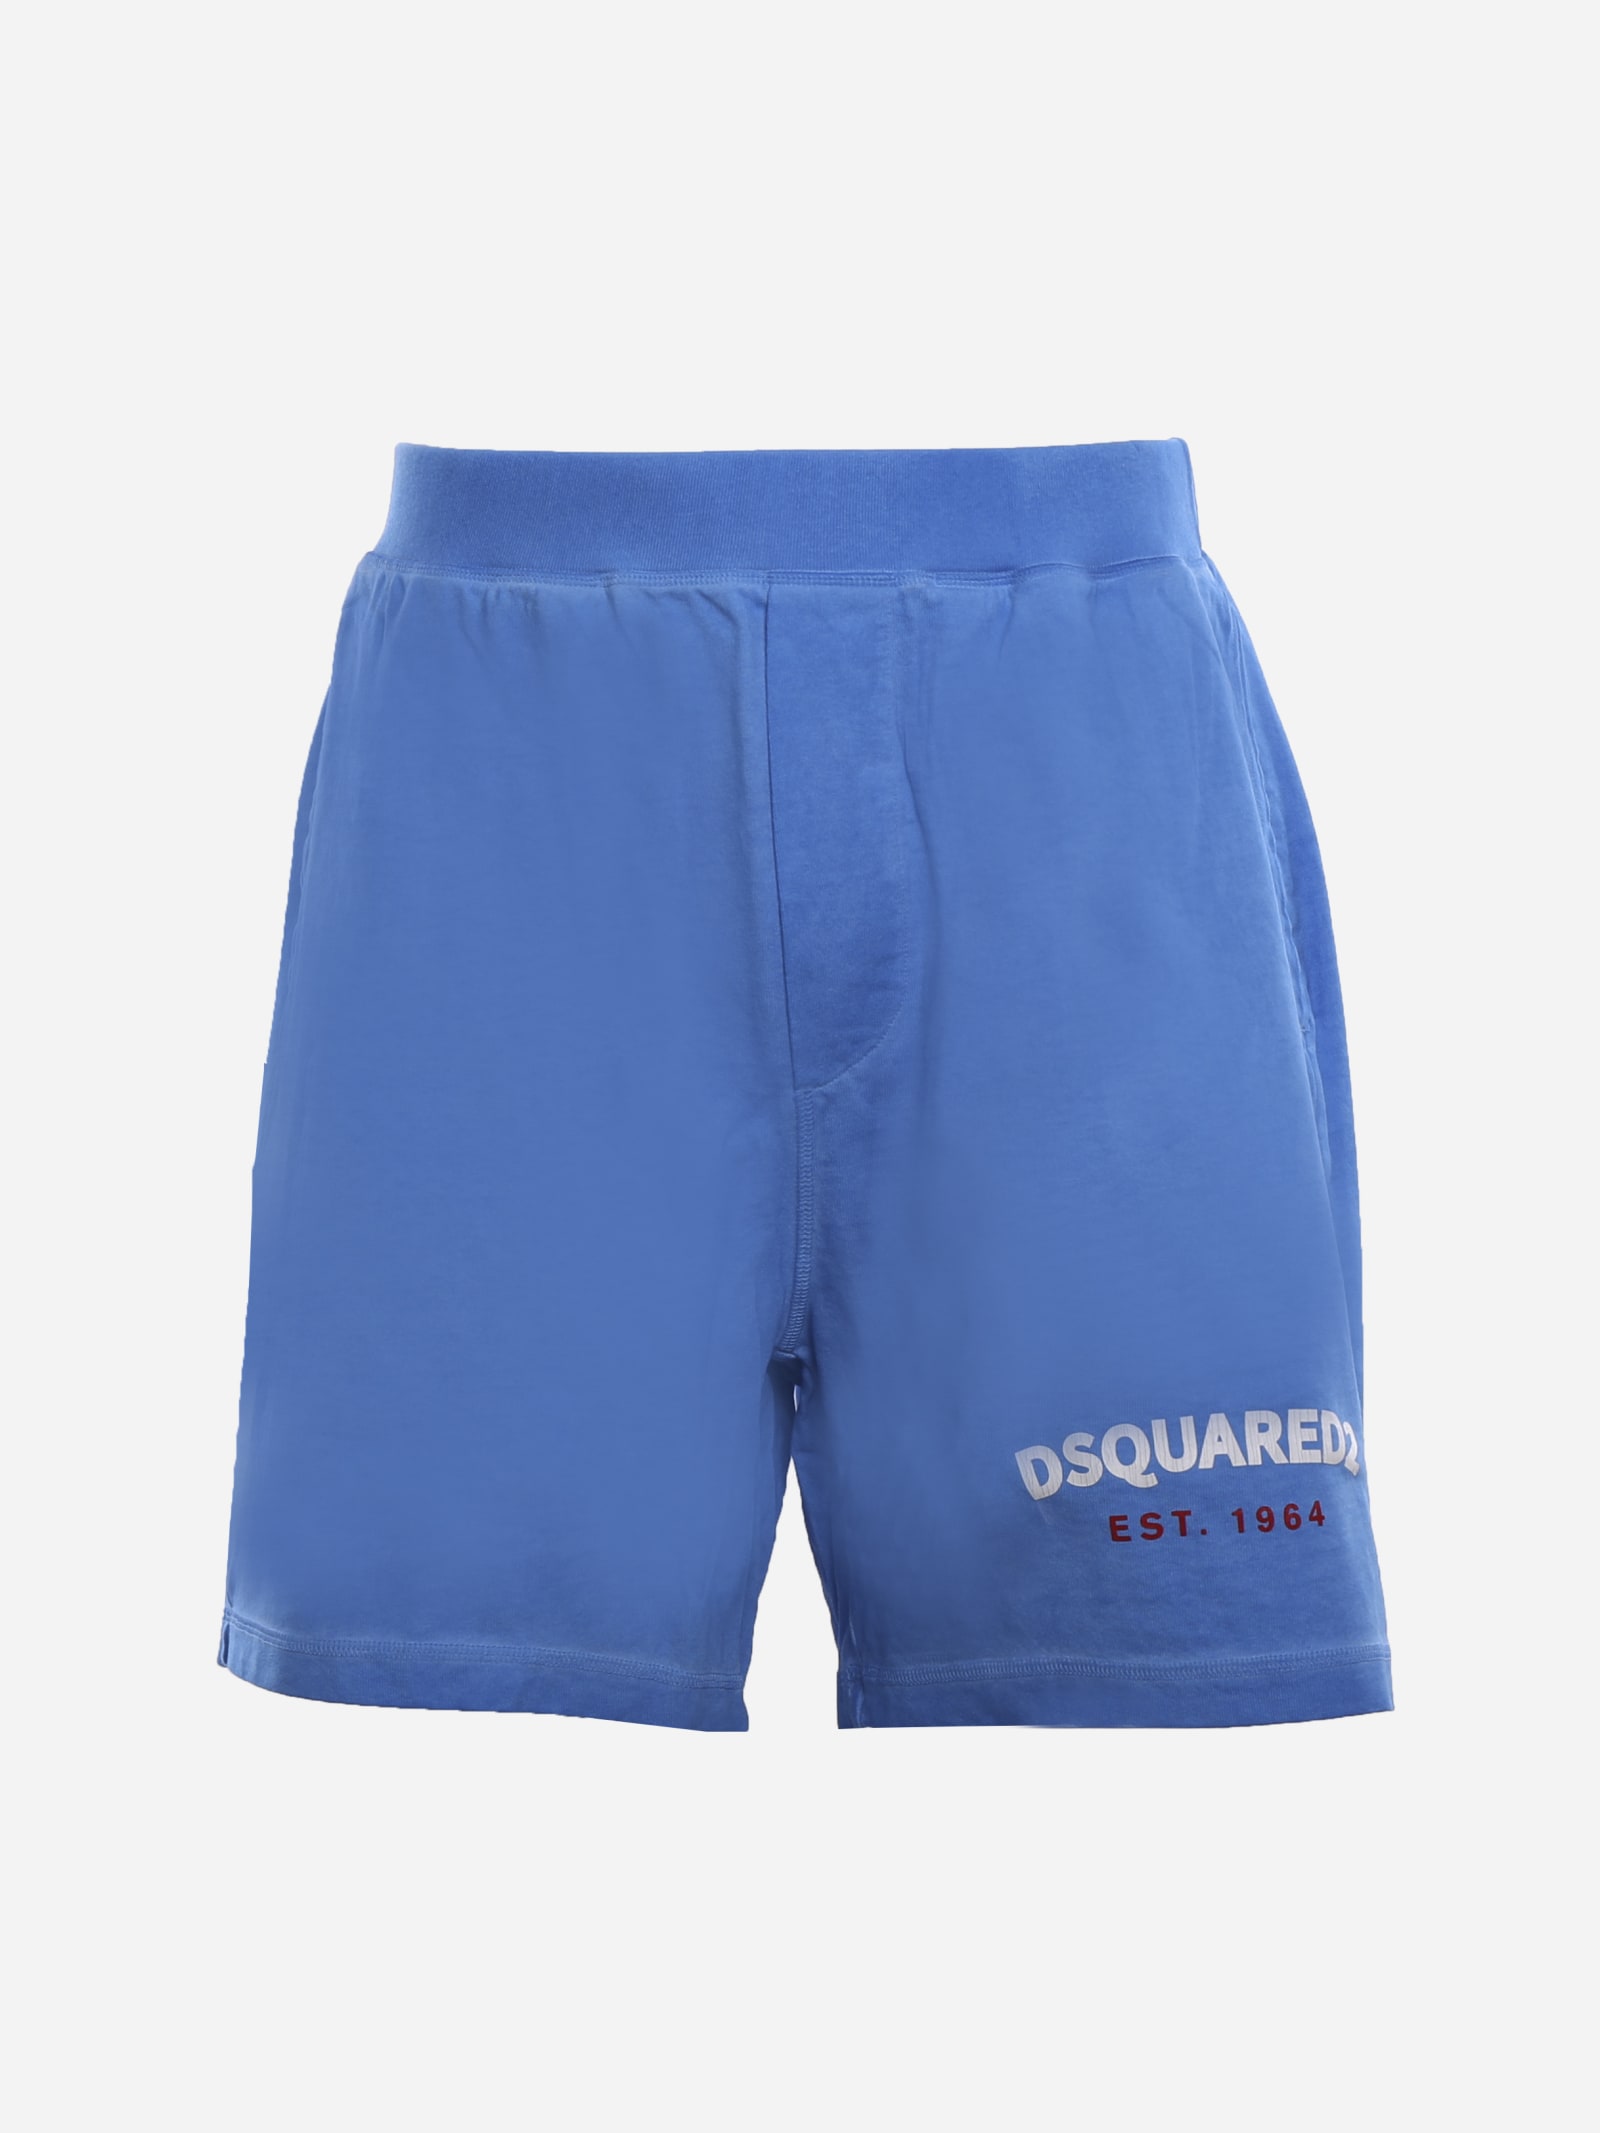 DSQUARED2 COTTON SHORTS WITH LOGO PRINT,S71MU0622 S23851483